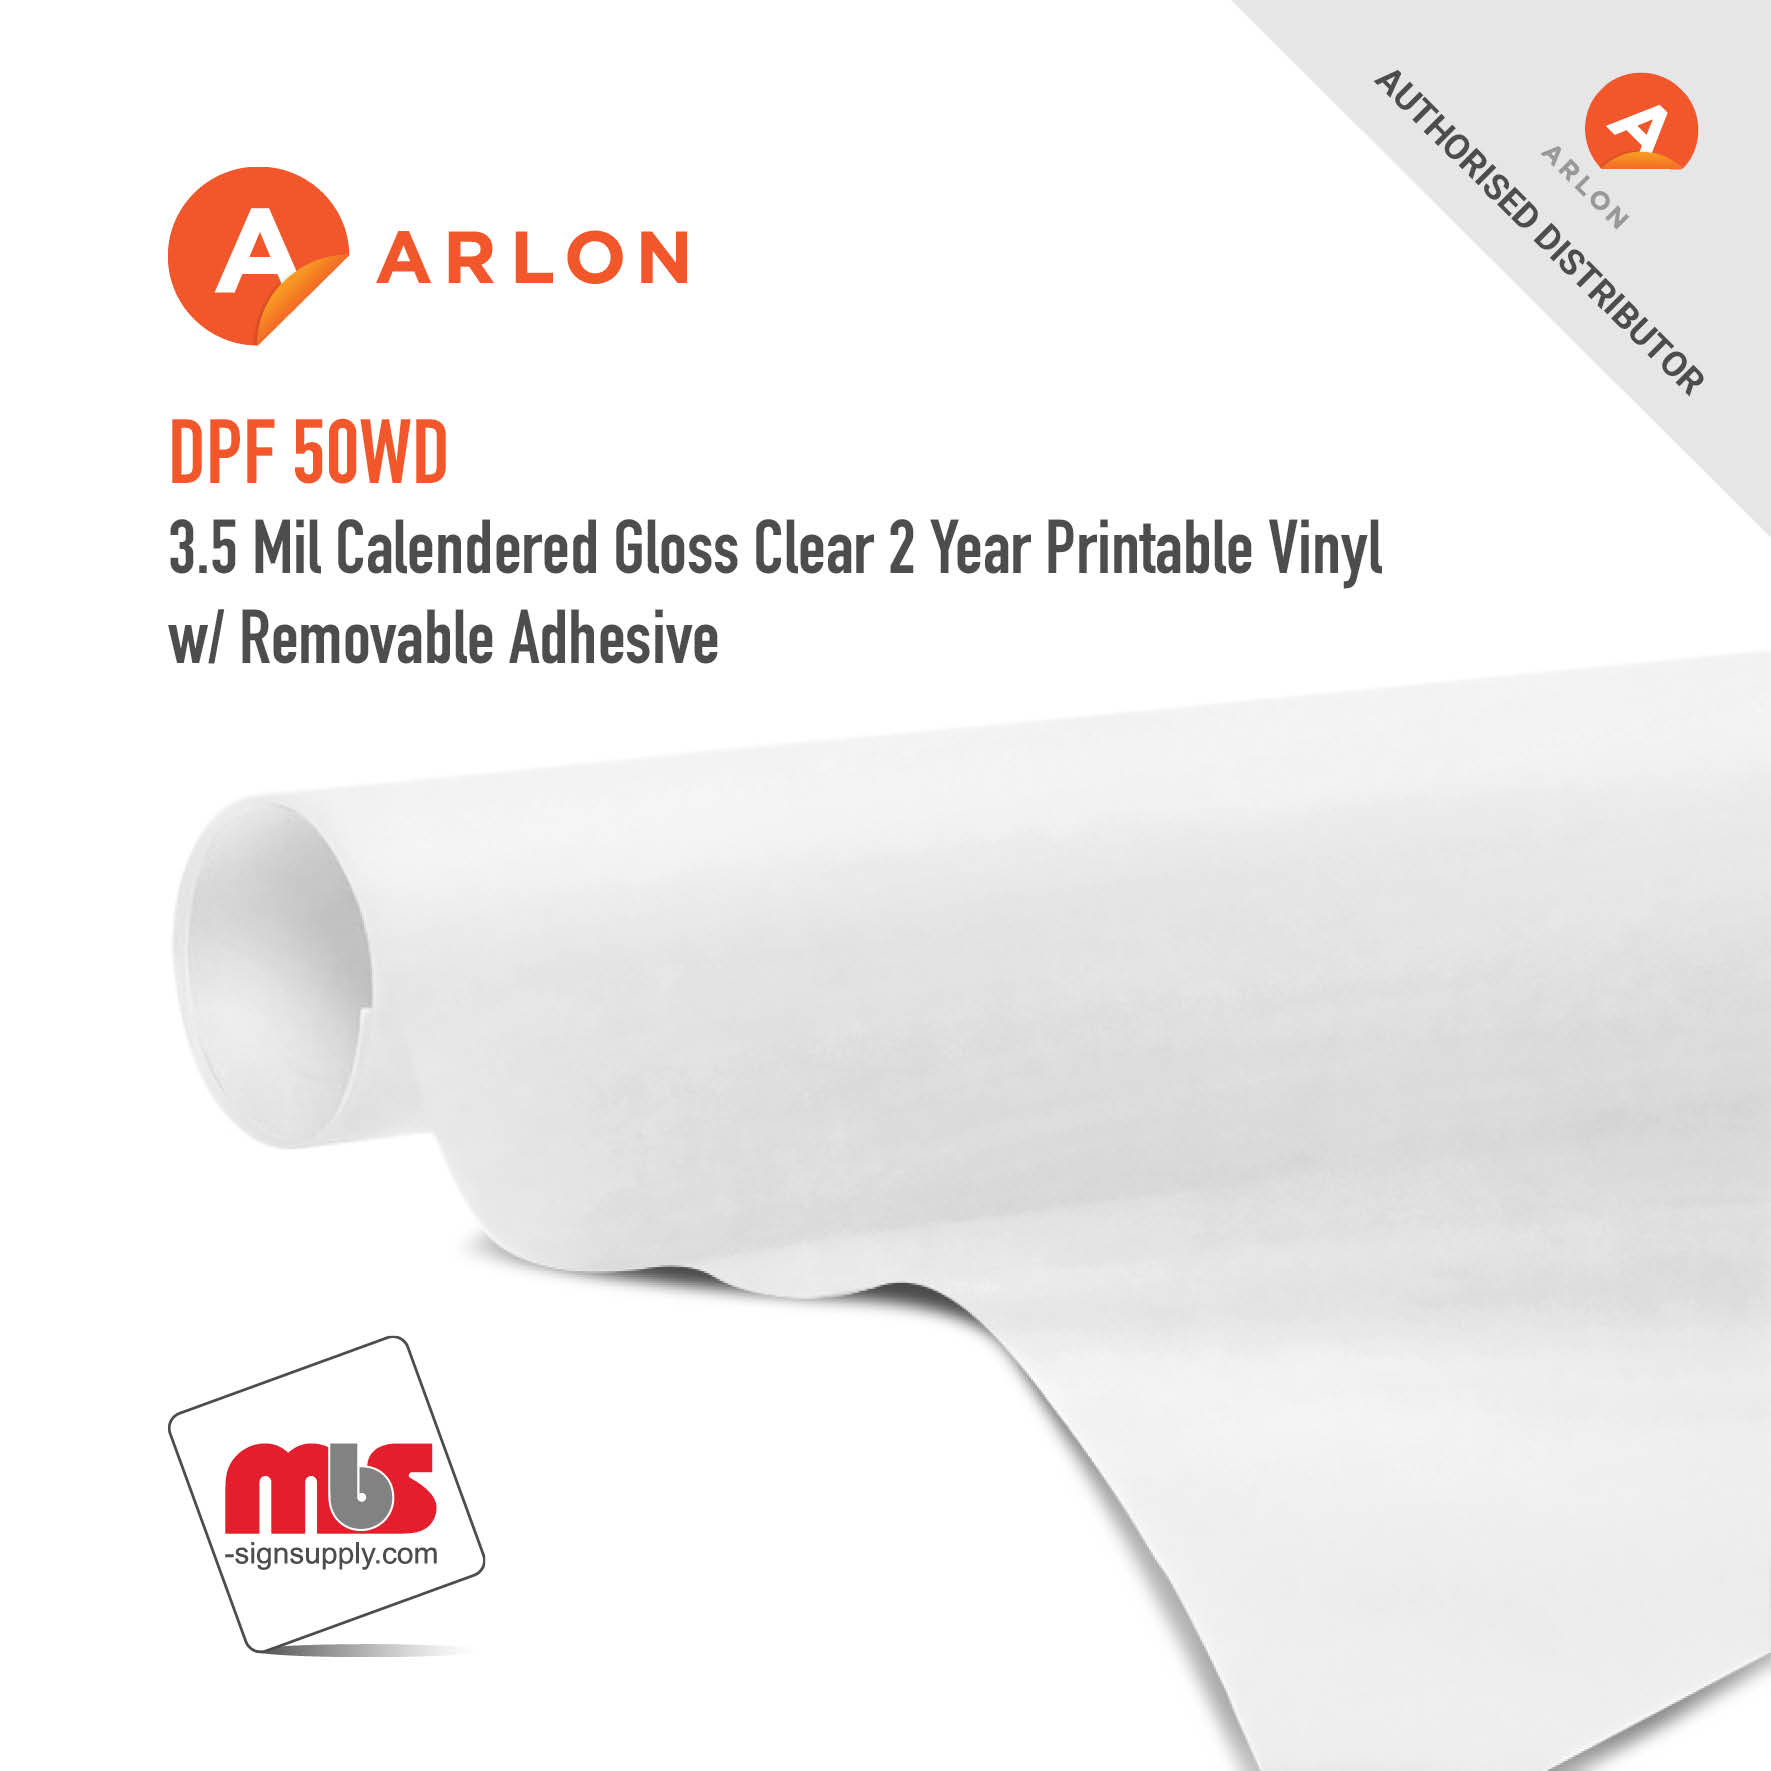 60'' x 50 Yard Roll - Arlon DPF 50WD 3.5 Mil Calendered Matte White 2 Year Printable Vinyl w/ Removable Adhesive